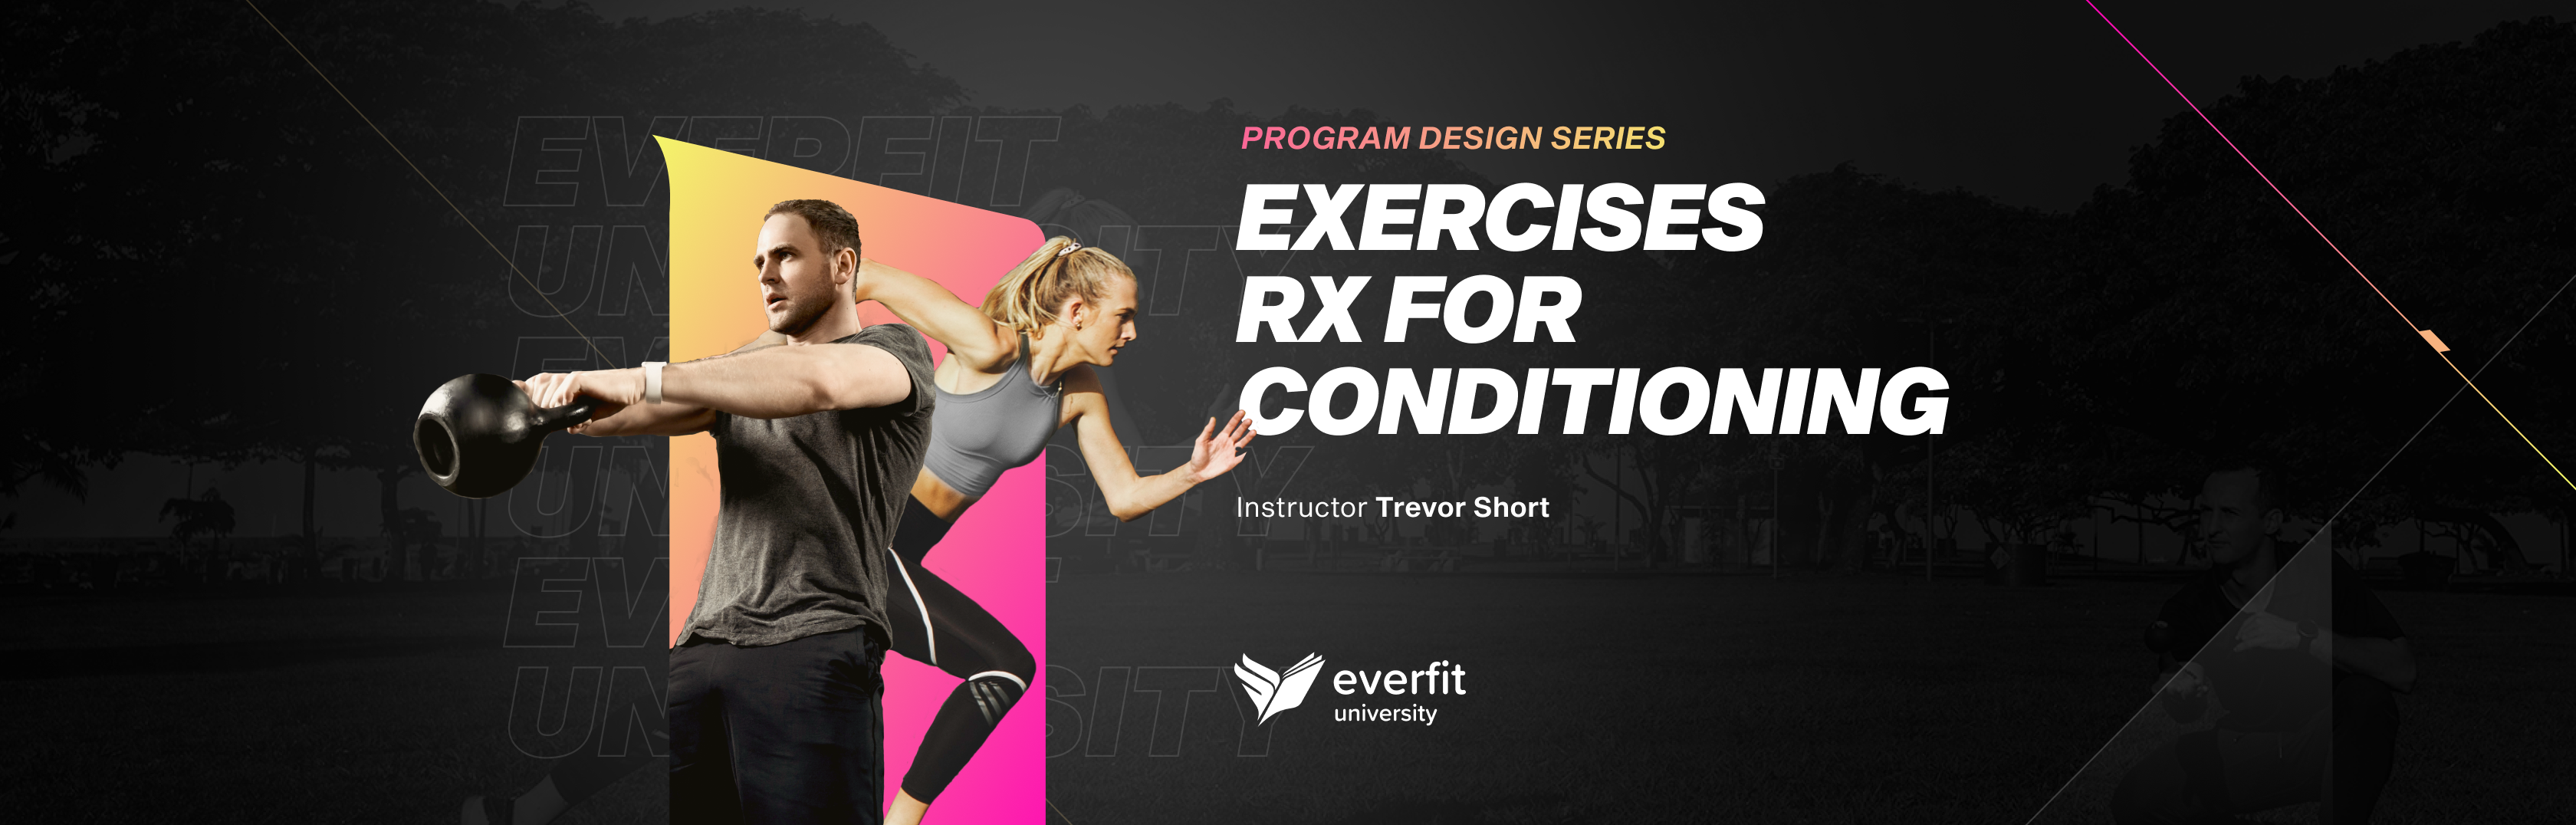 Exercises Rx for Conditioning